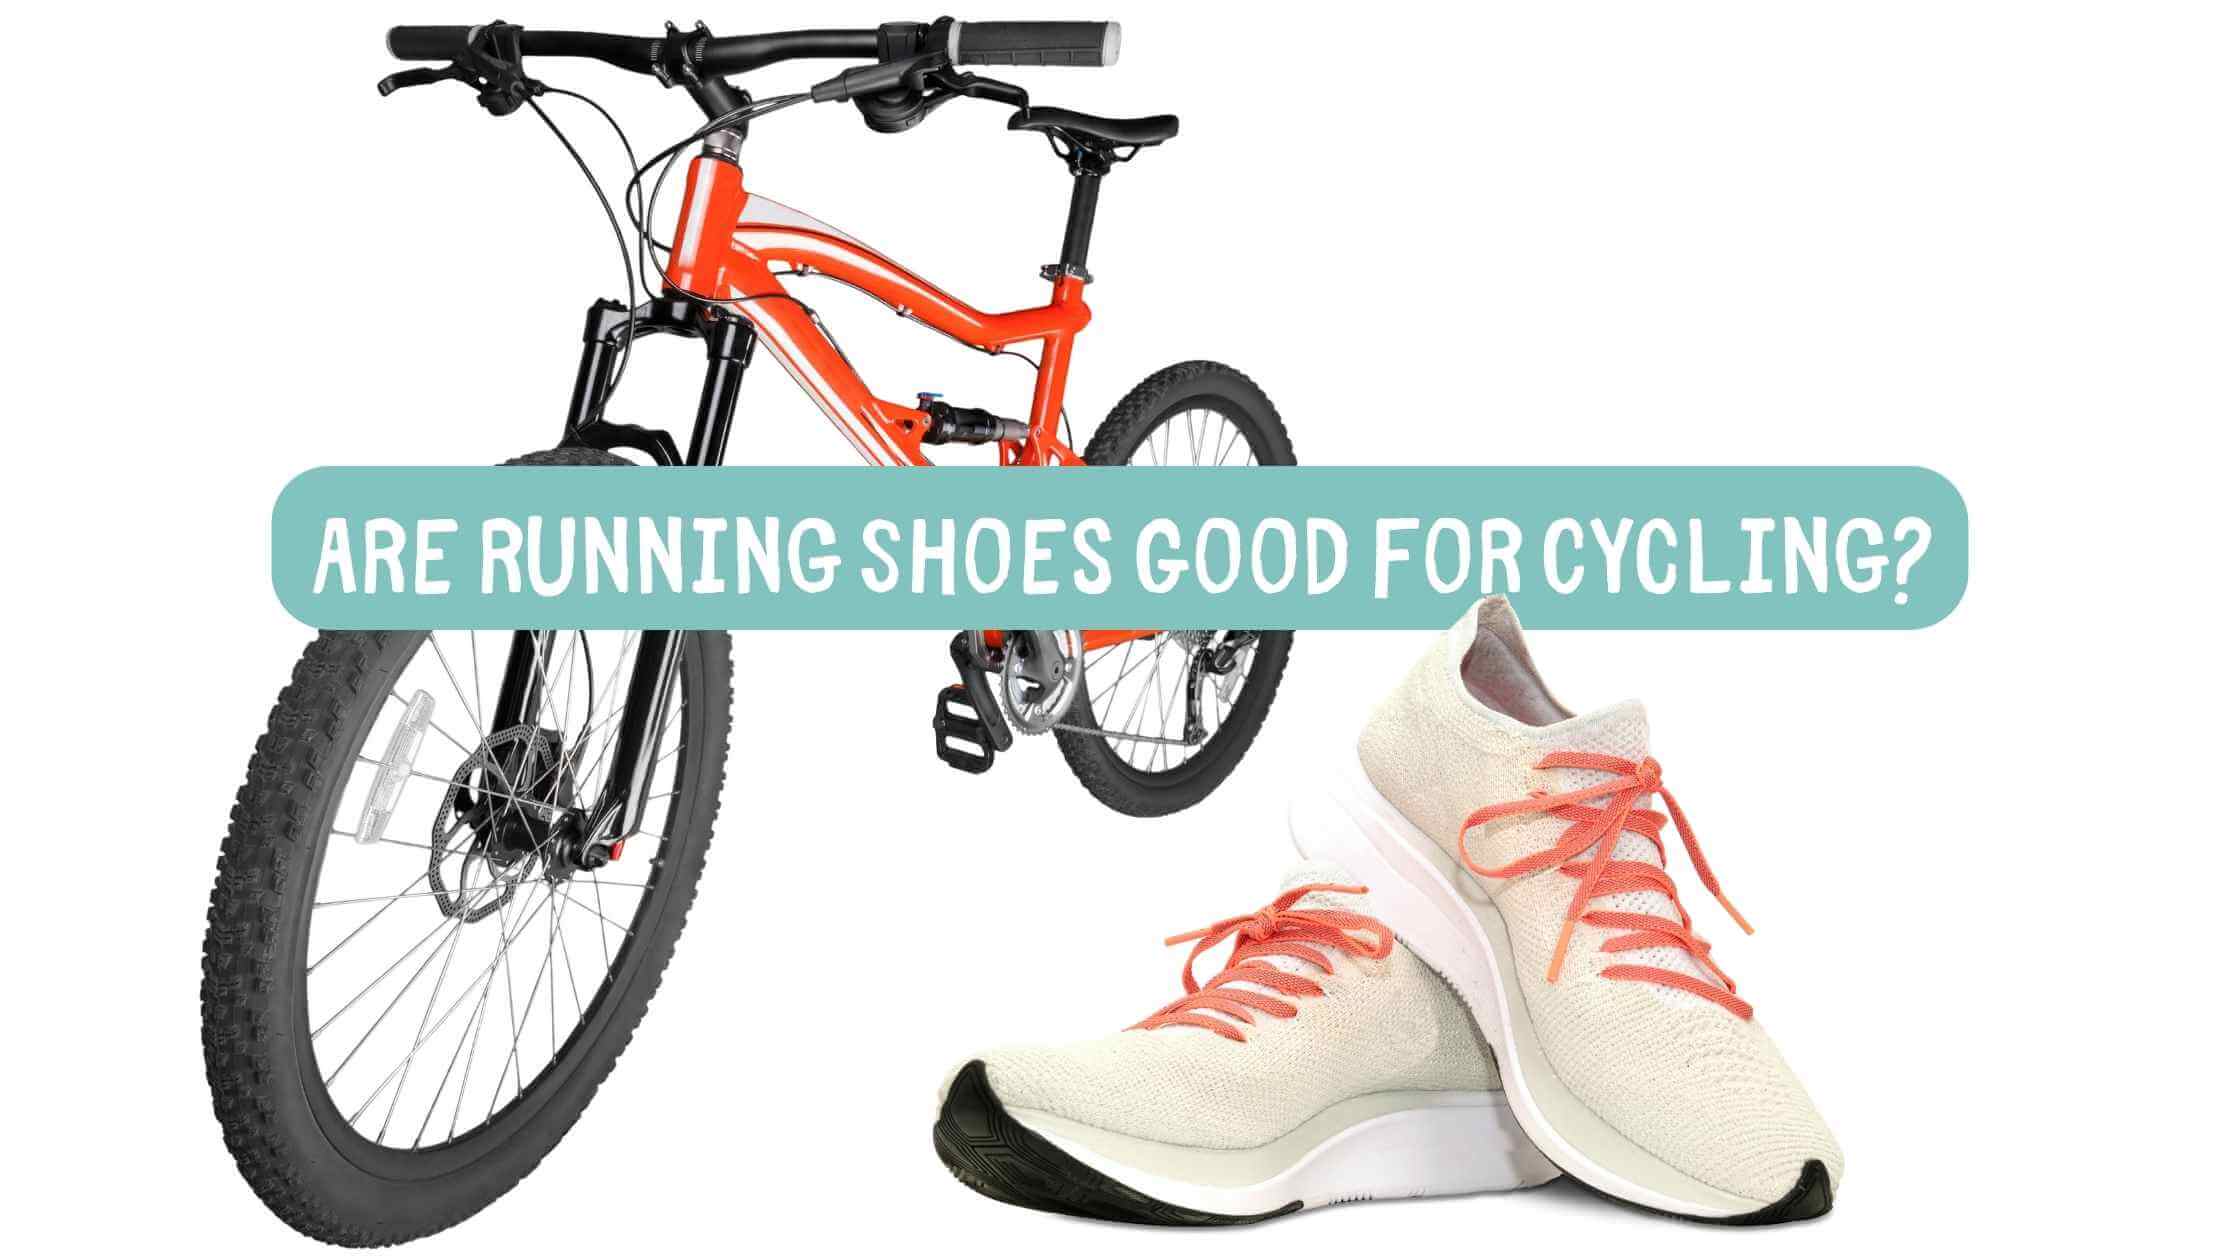 Are Running Shoes Good for Cycling